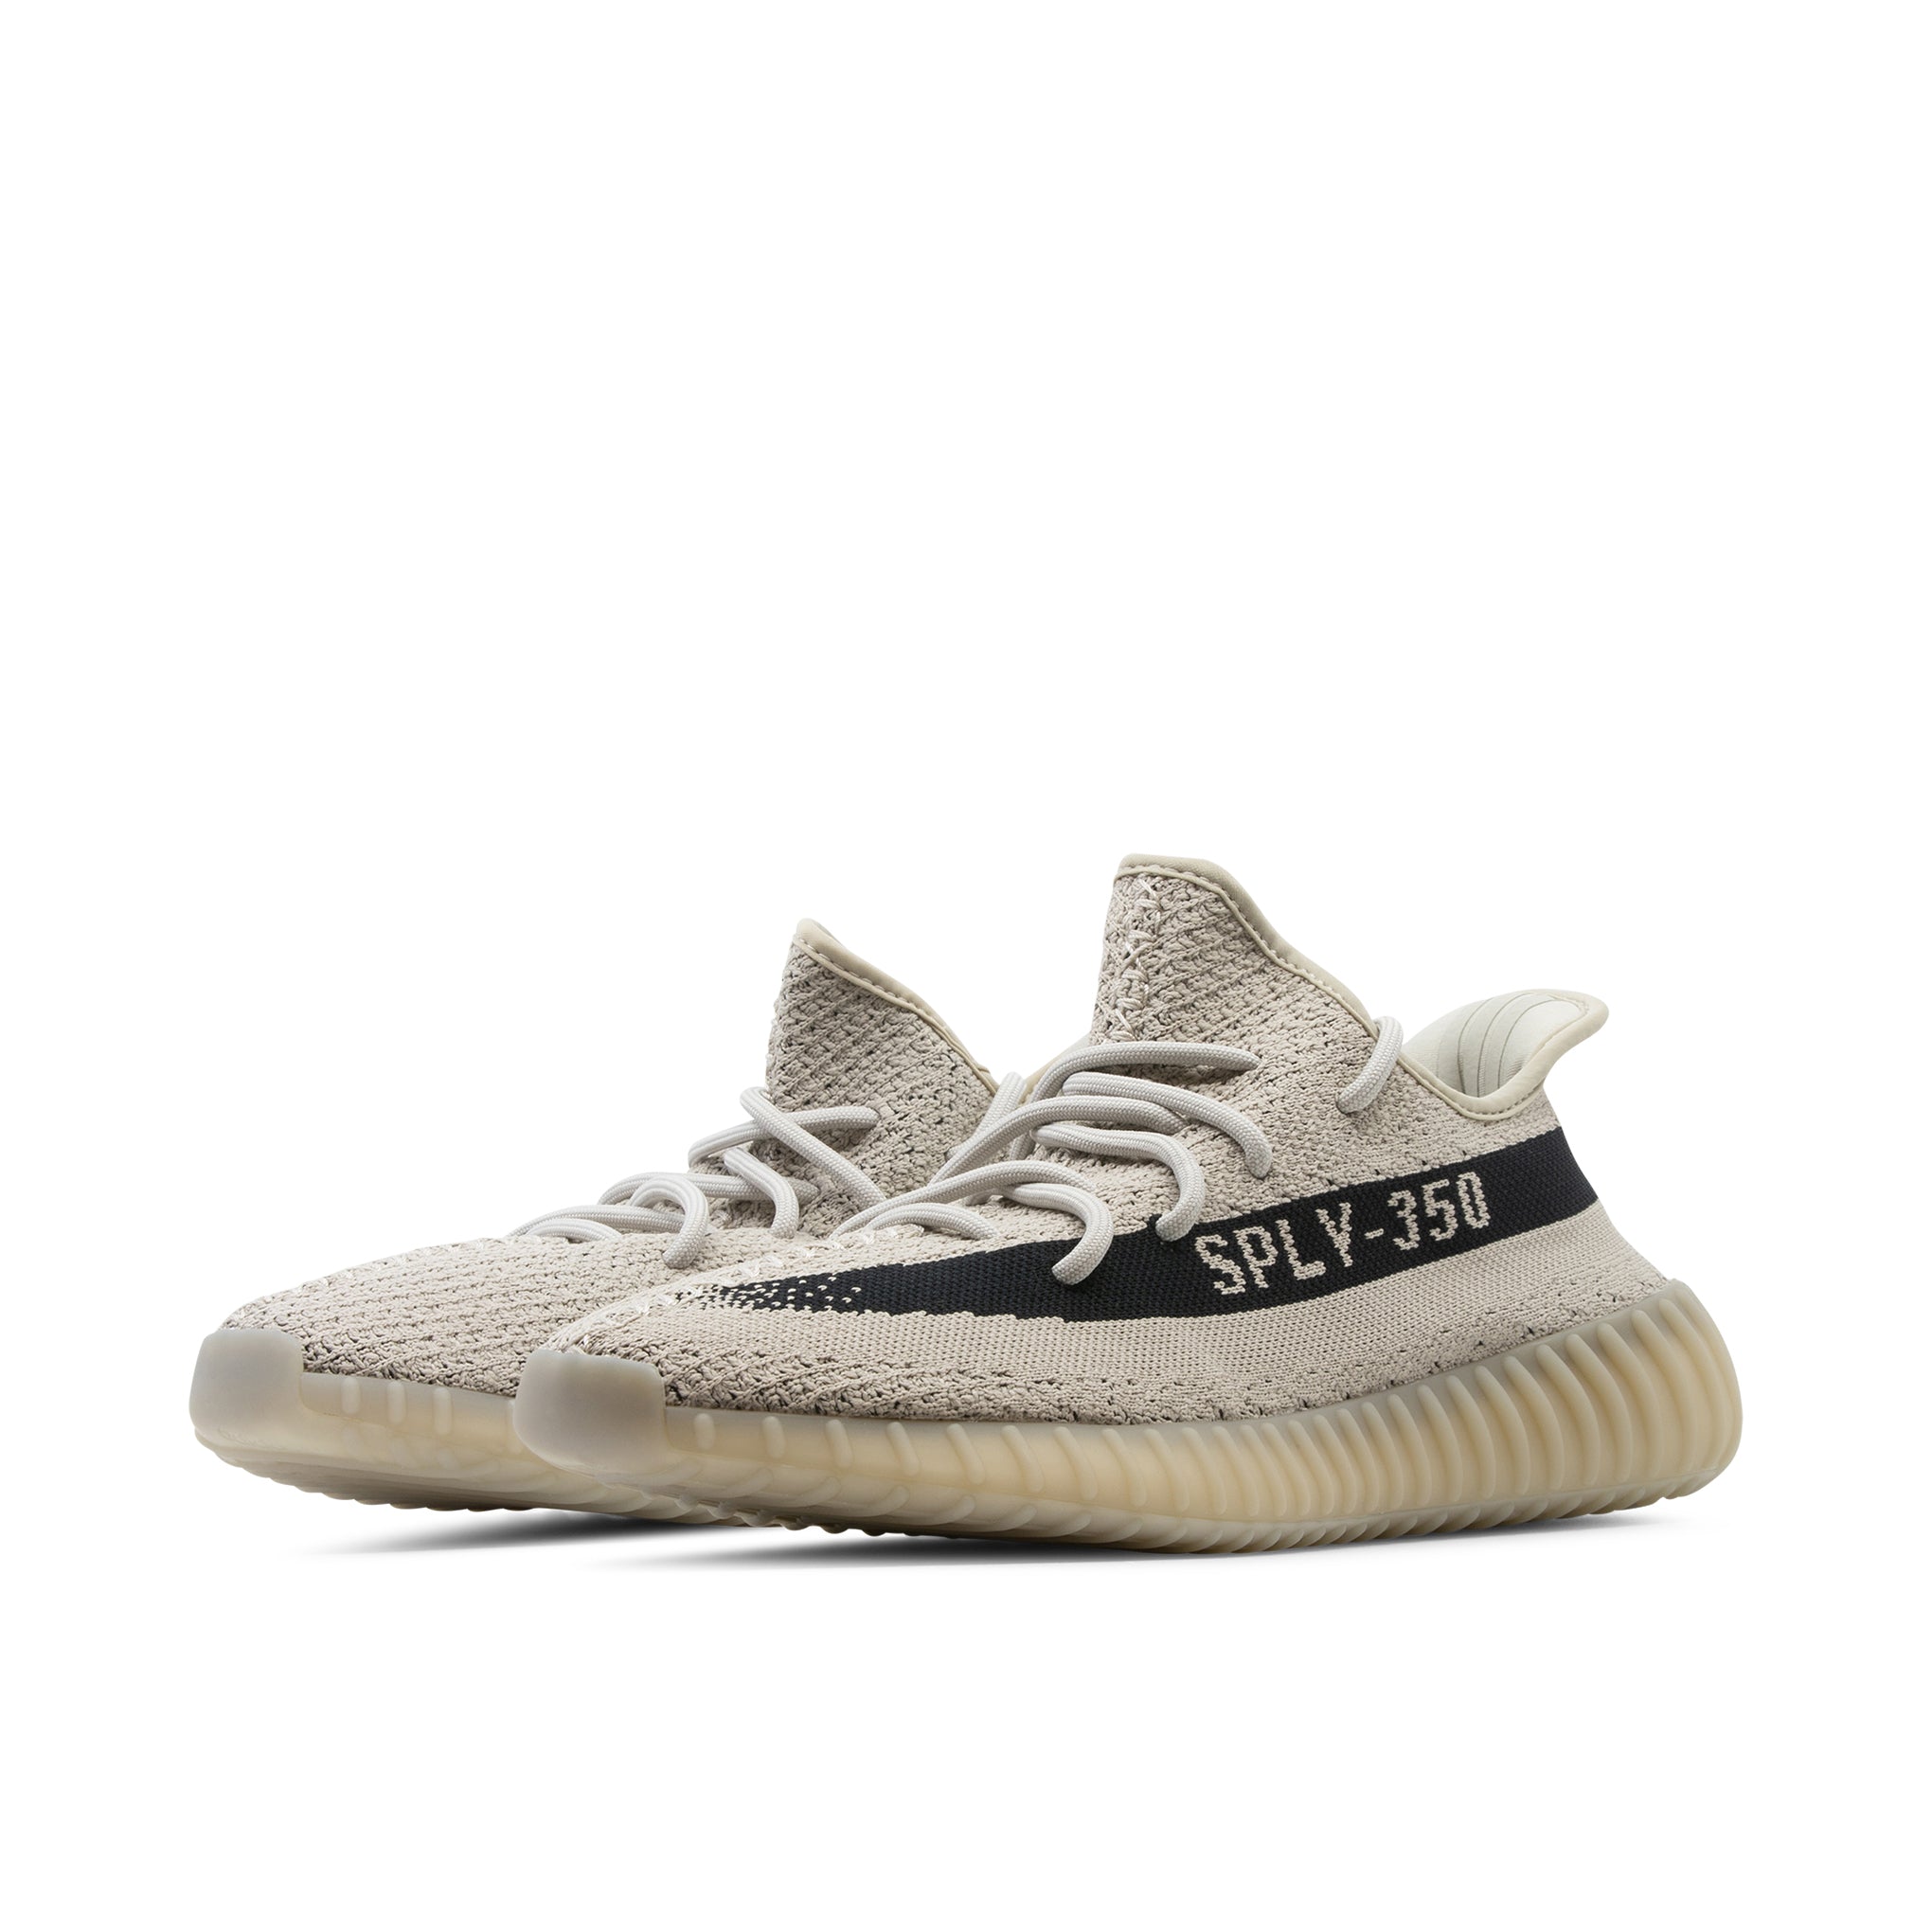 YEEZY BOOST 350 V2 板岩